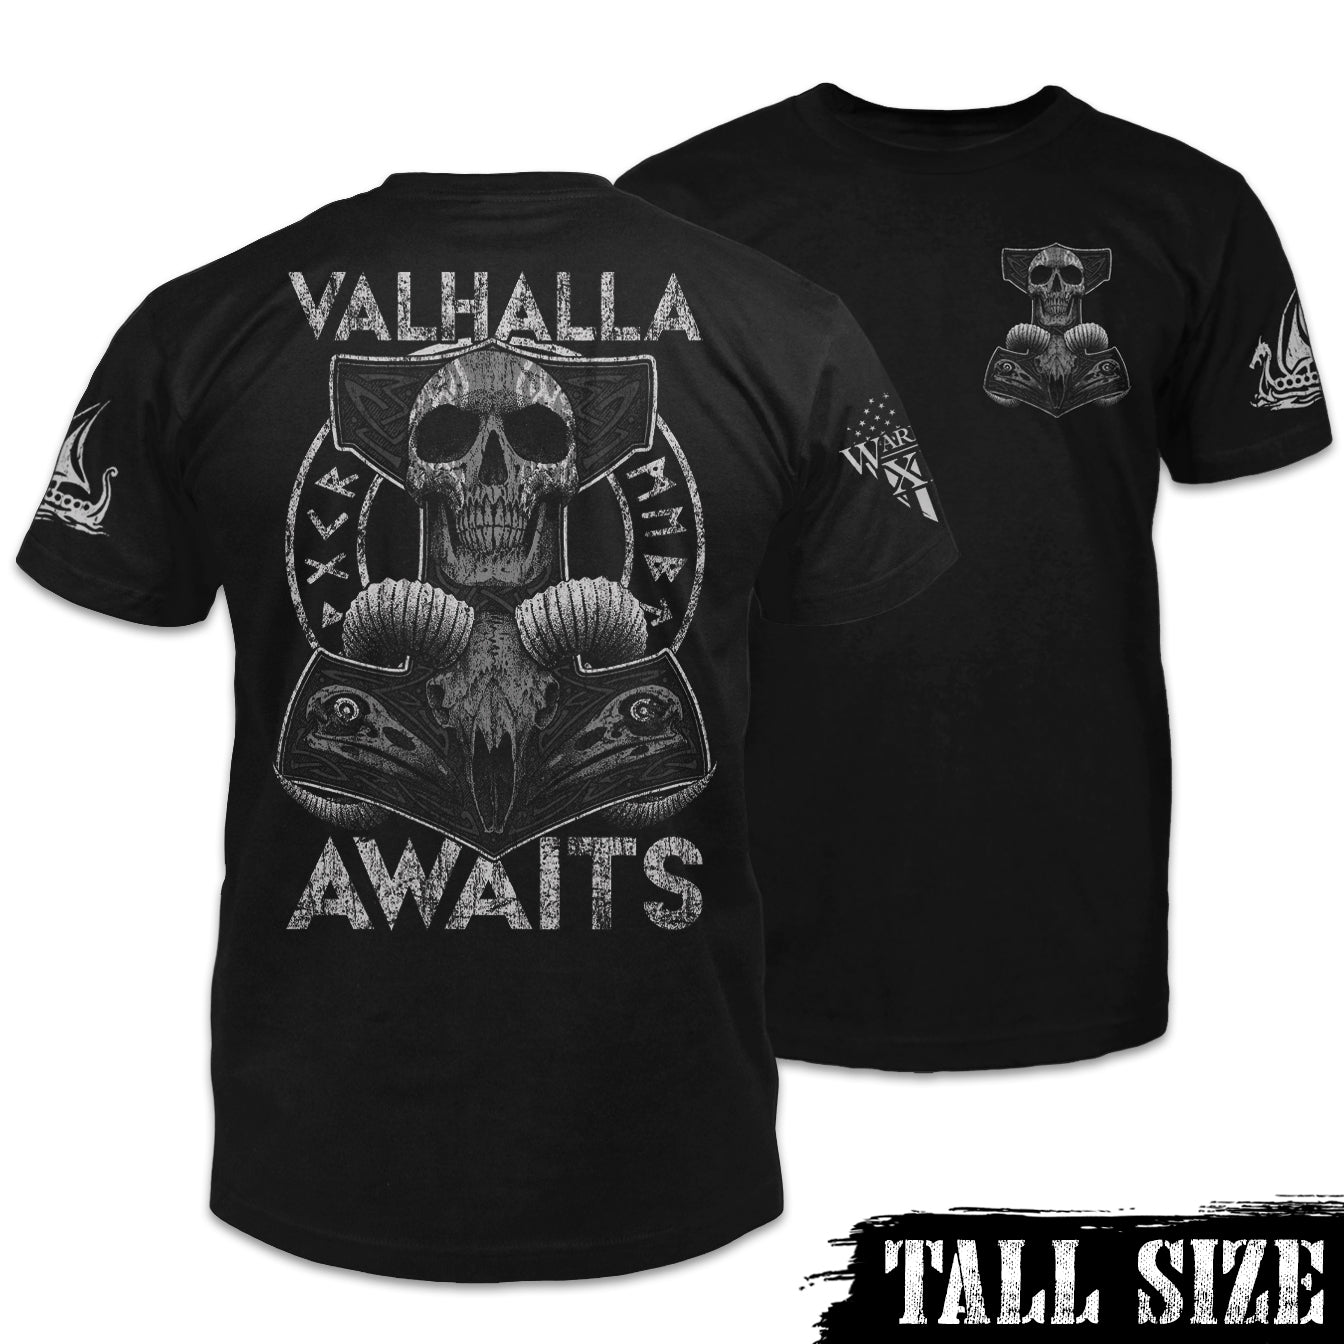 Front & back black tall size shirt features a Thor's hammer skull design. The ram skull symbolizes the rams that pulled Thor's chariot.